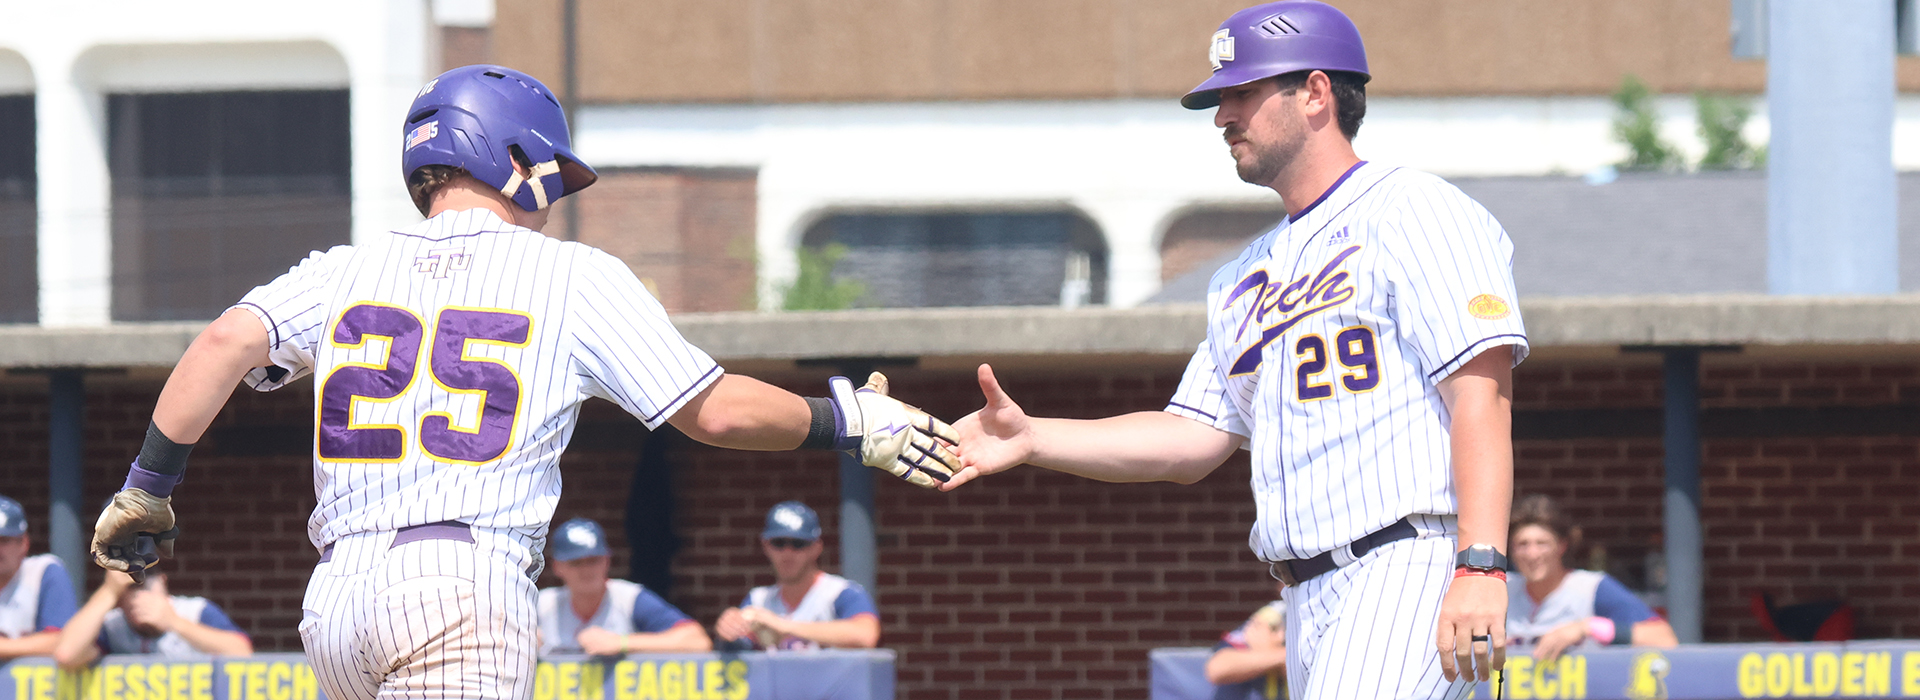 Tech splits Senior Day doubleheader with USI, Saturday's game moved up to noon start